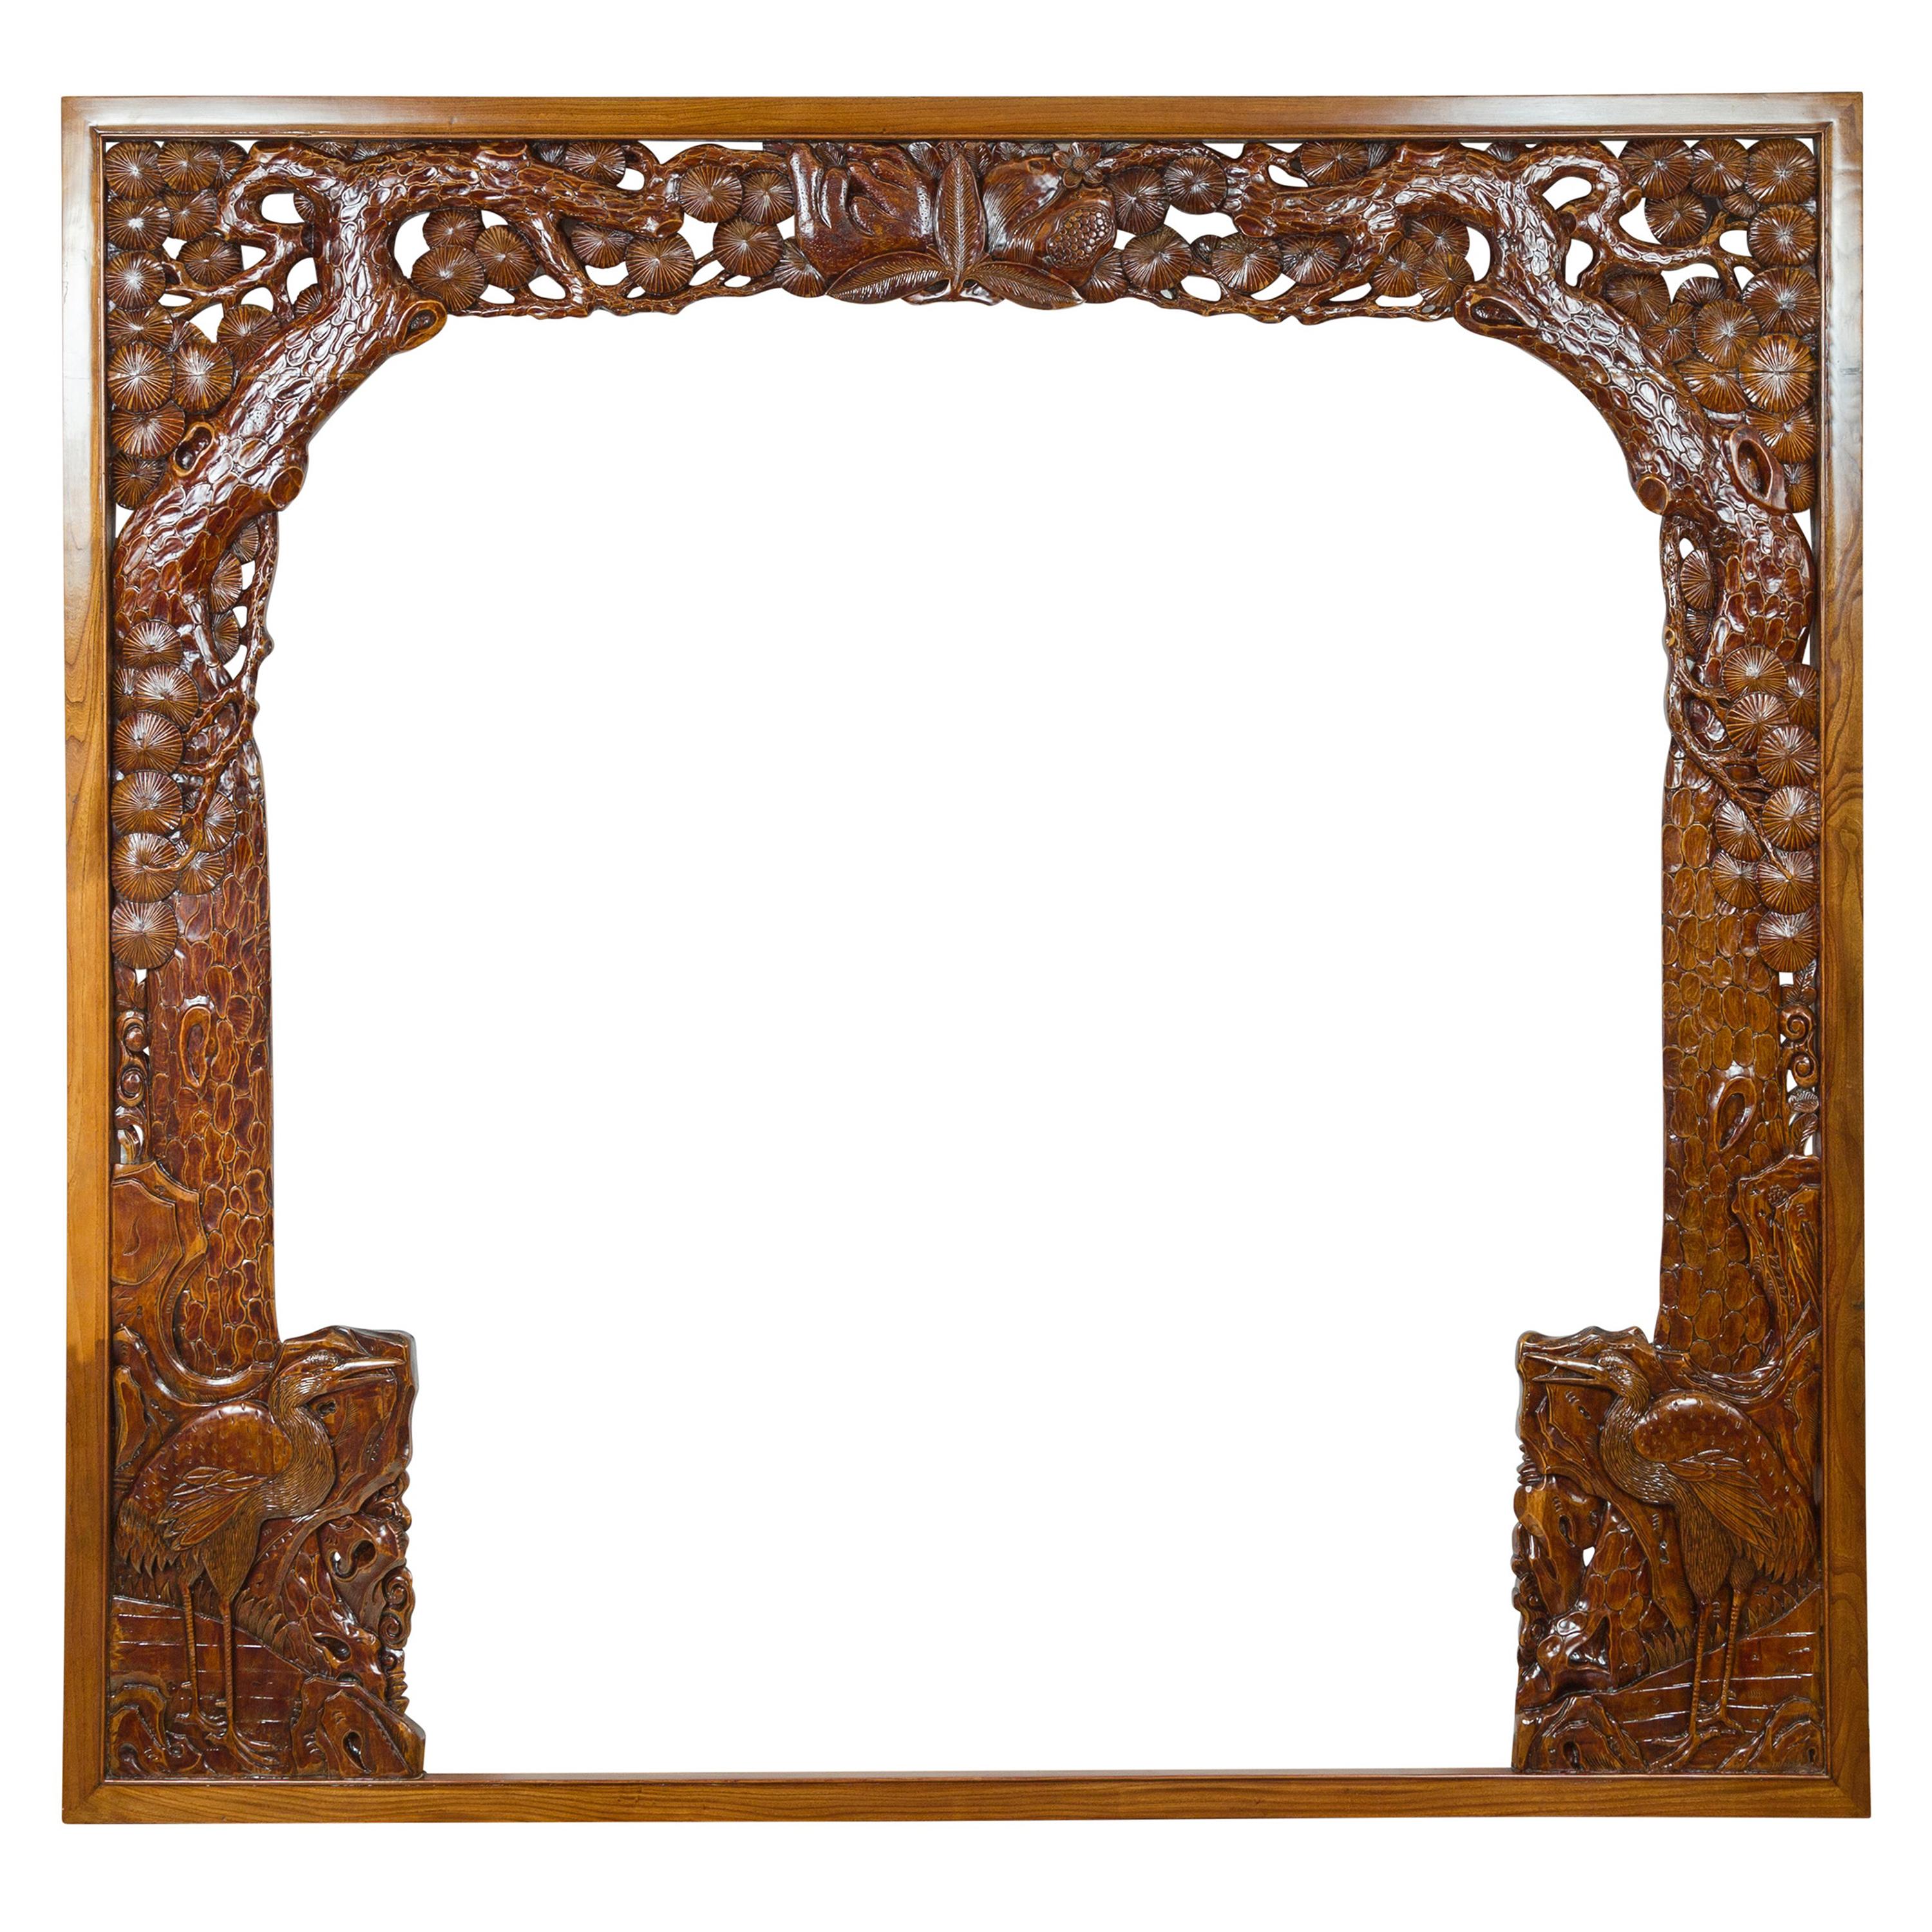 Oversized Antique Chinese Carved Wooden Frame with Birds, Foliage and Tree Limbs